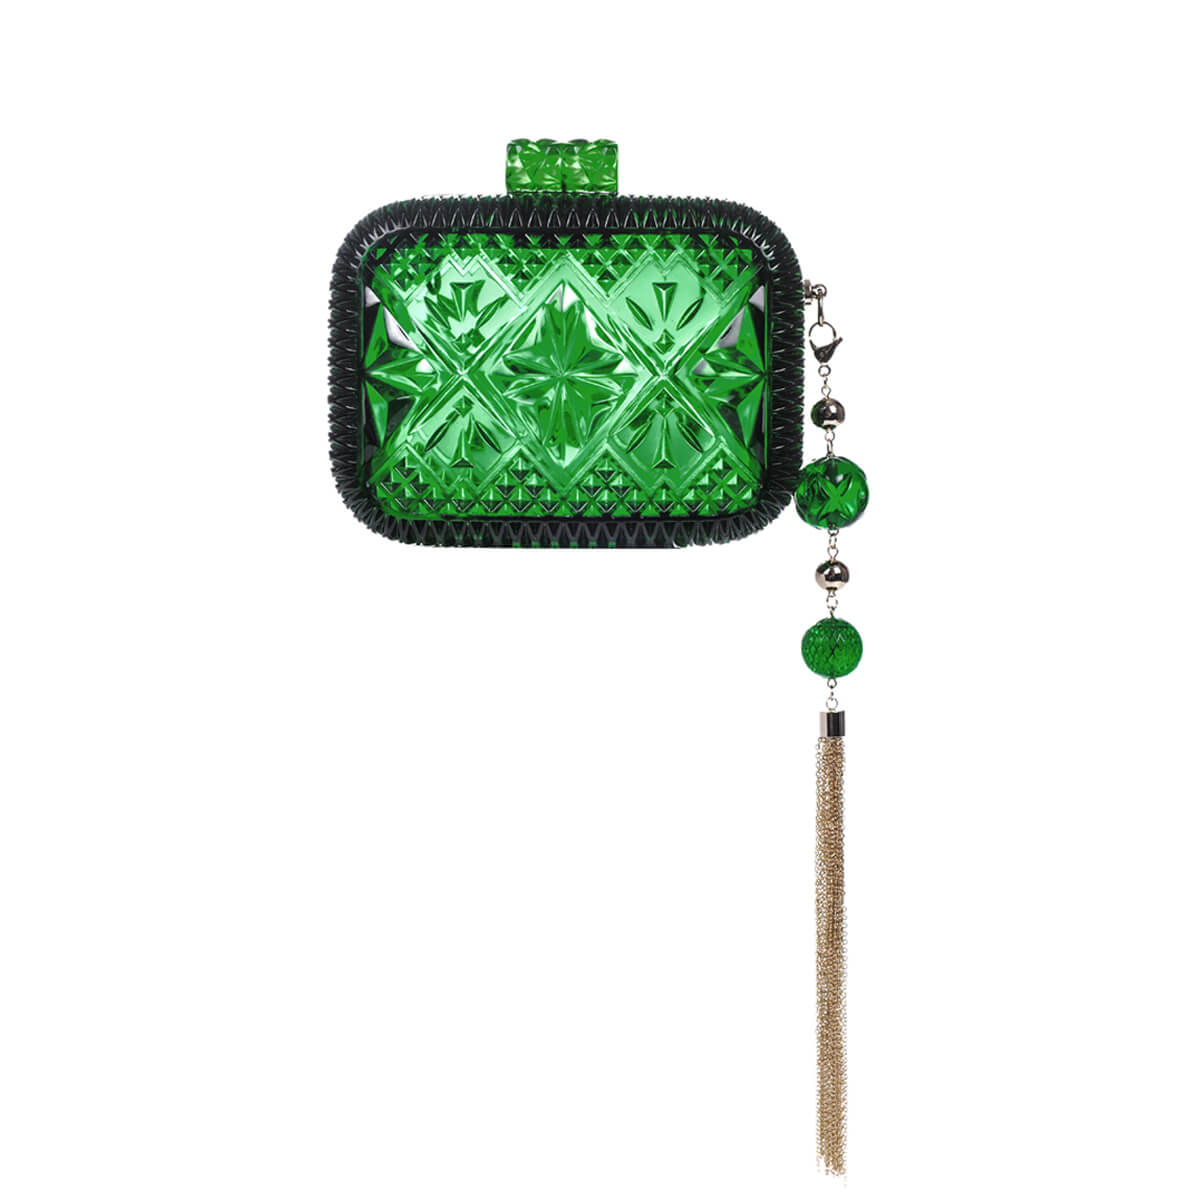 handmade vintage cut glass inspired clutch in green